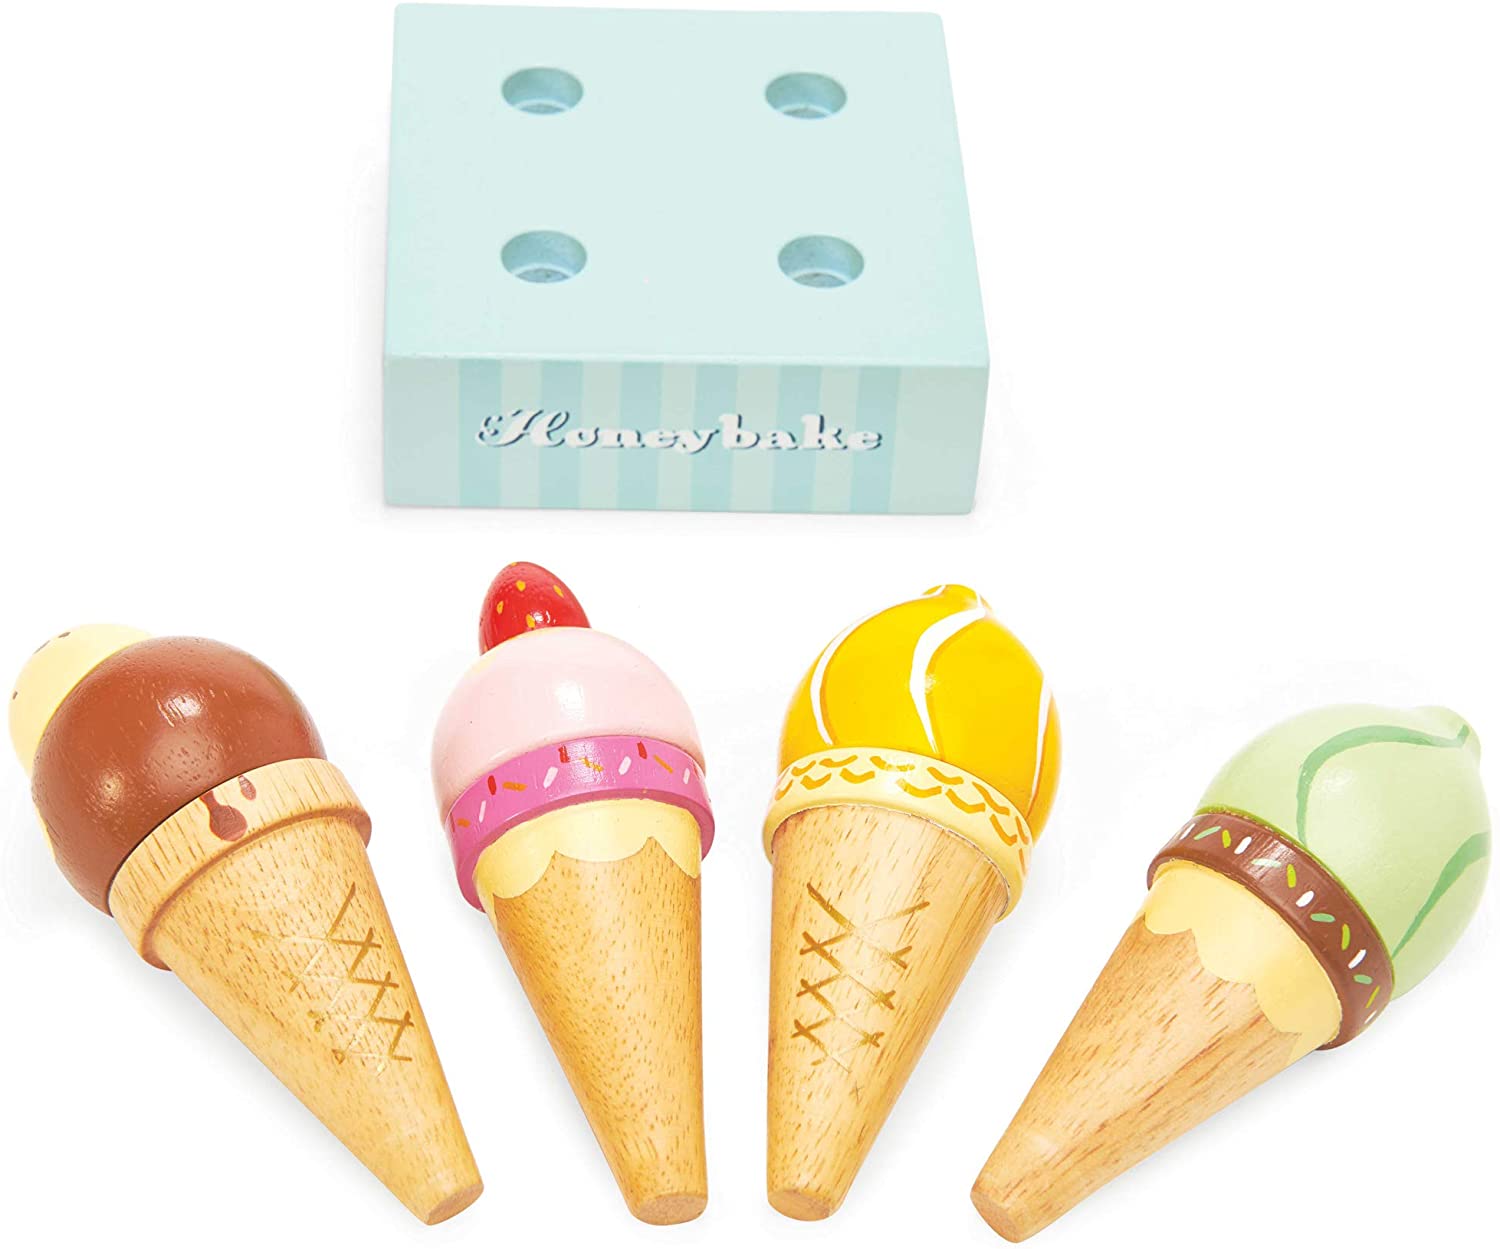 Play ice cream - Tricia Lowenfield Design